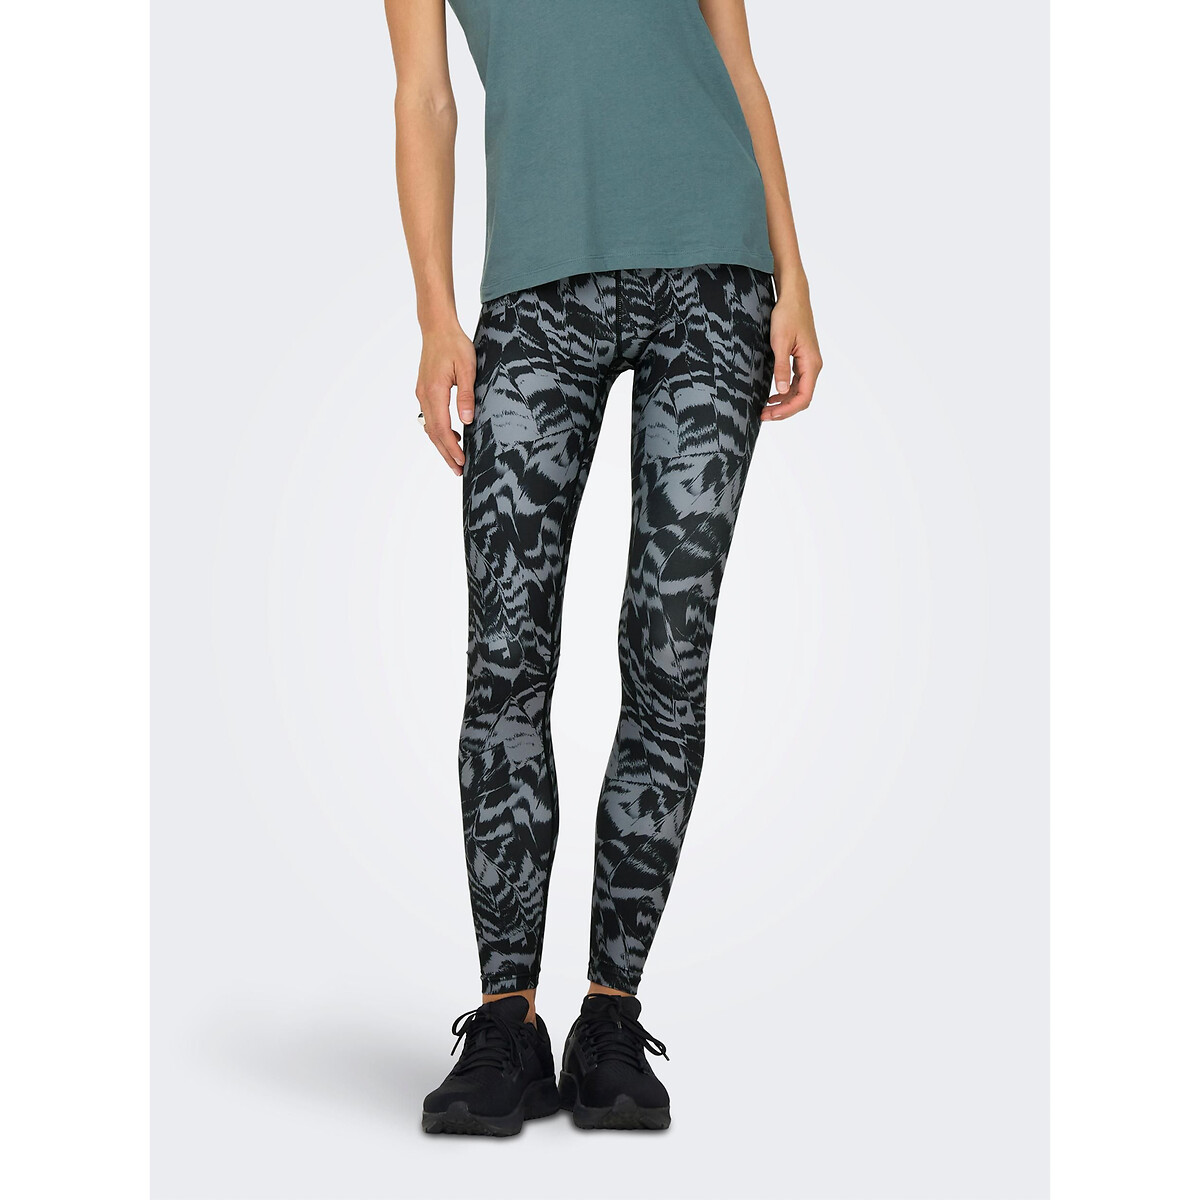 Image of Dena Sports Leggings with High Waist